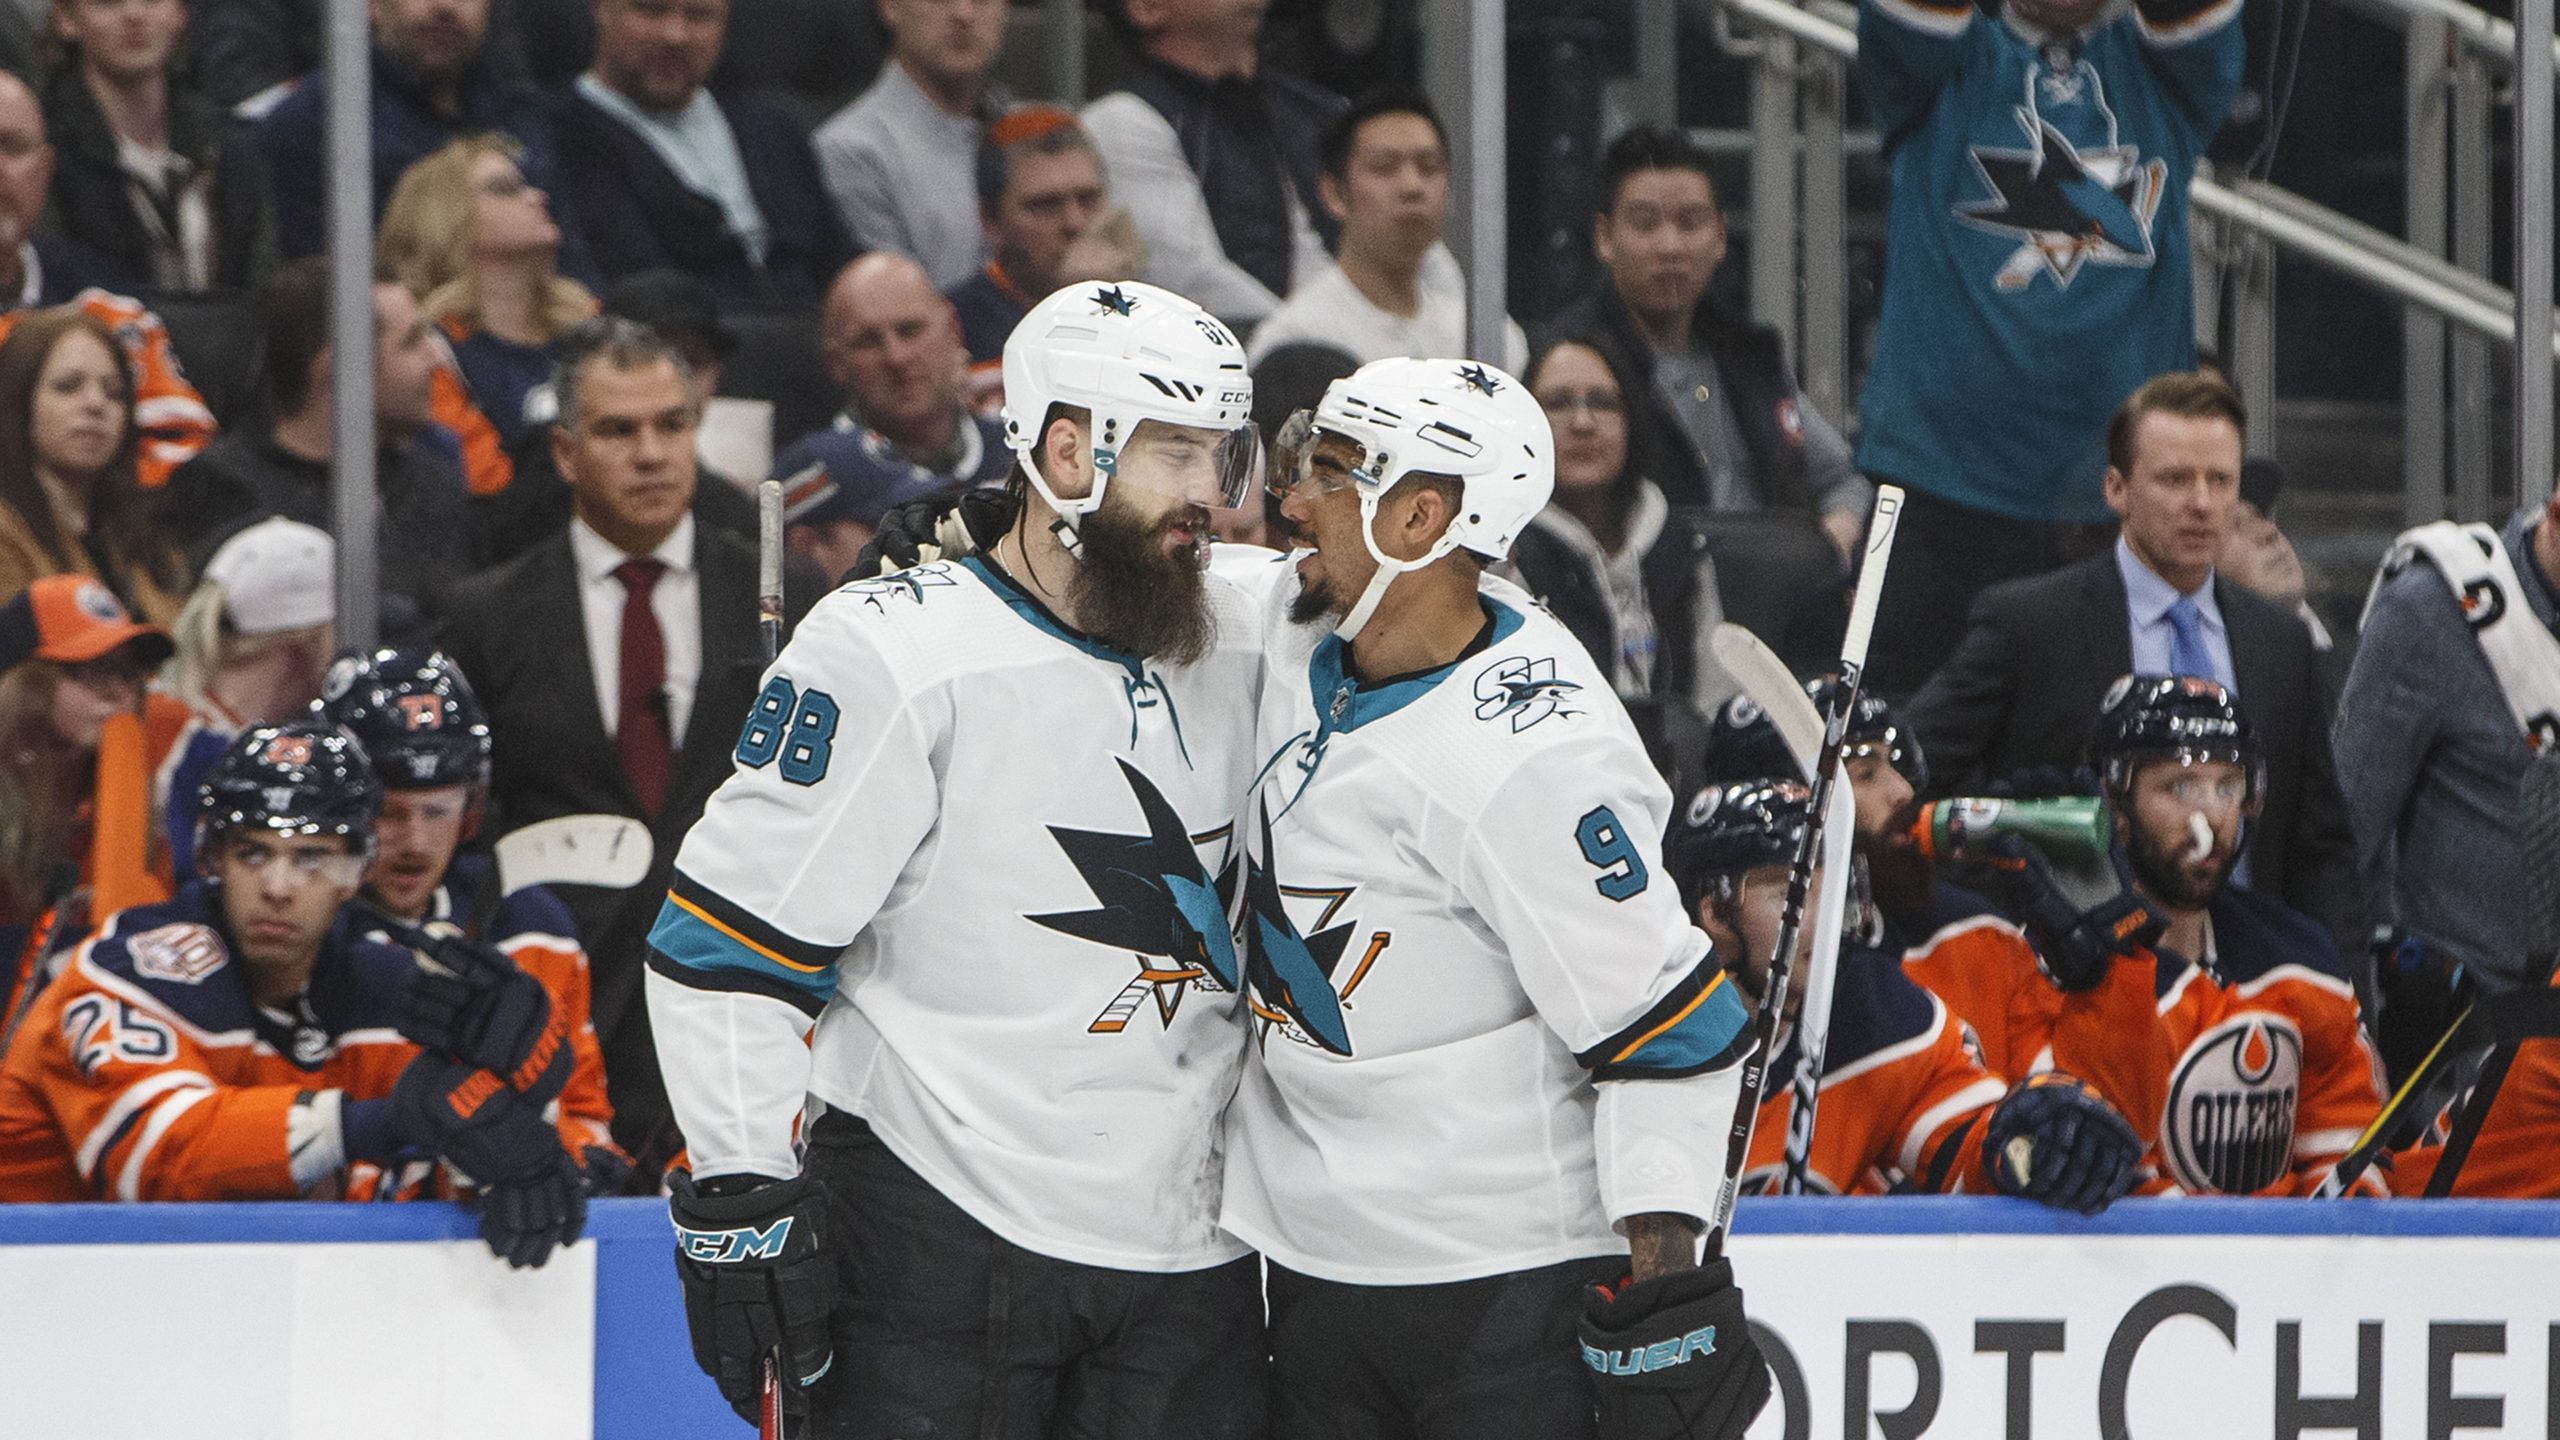 Sharks Floundering Towards Playoffs, While Oilers Hope There's A Silver Lining For Draisaitl